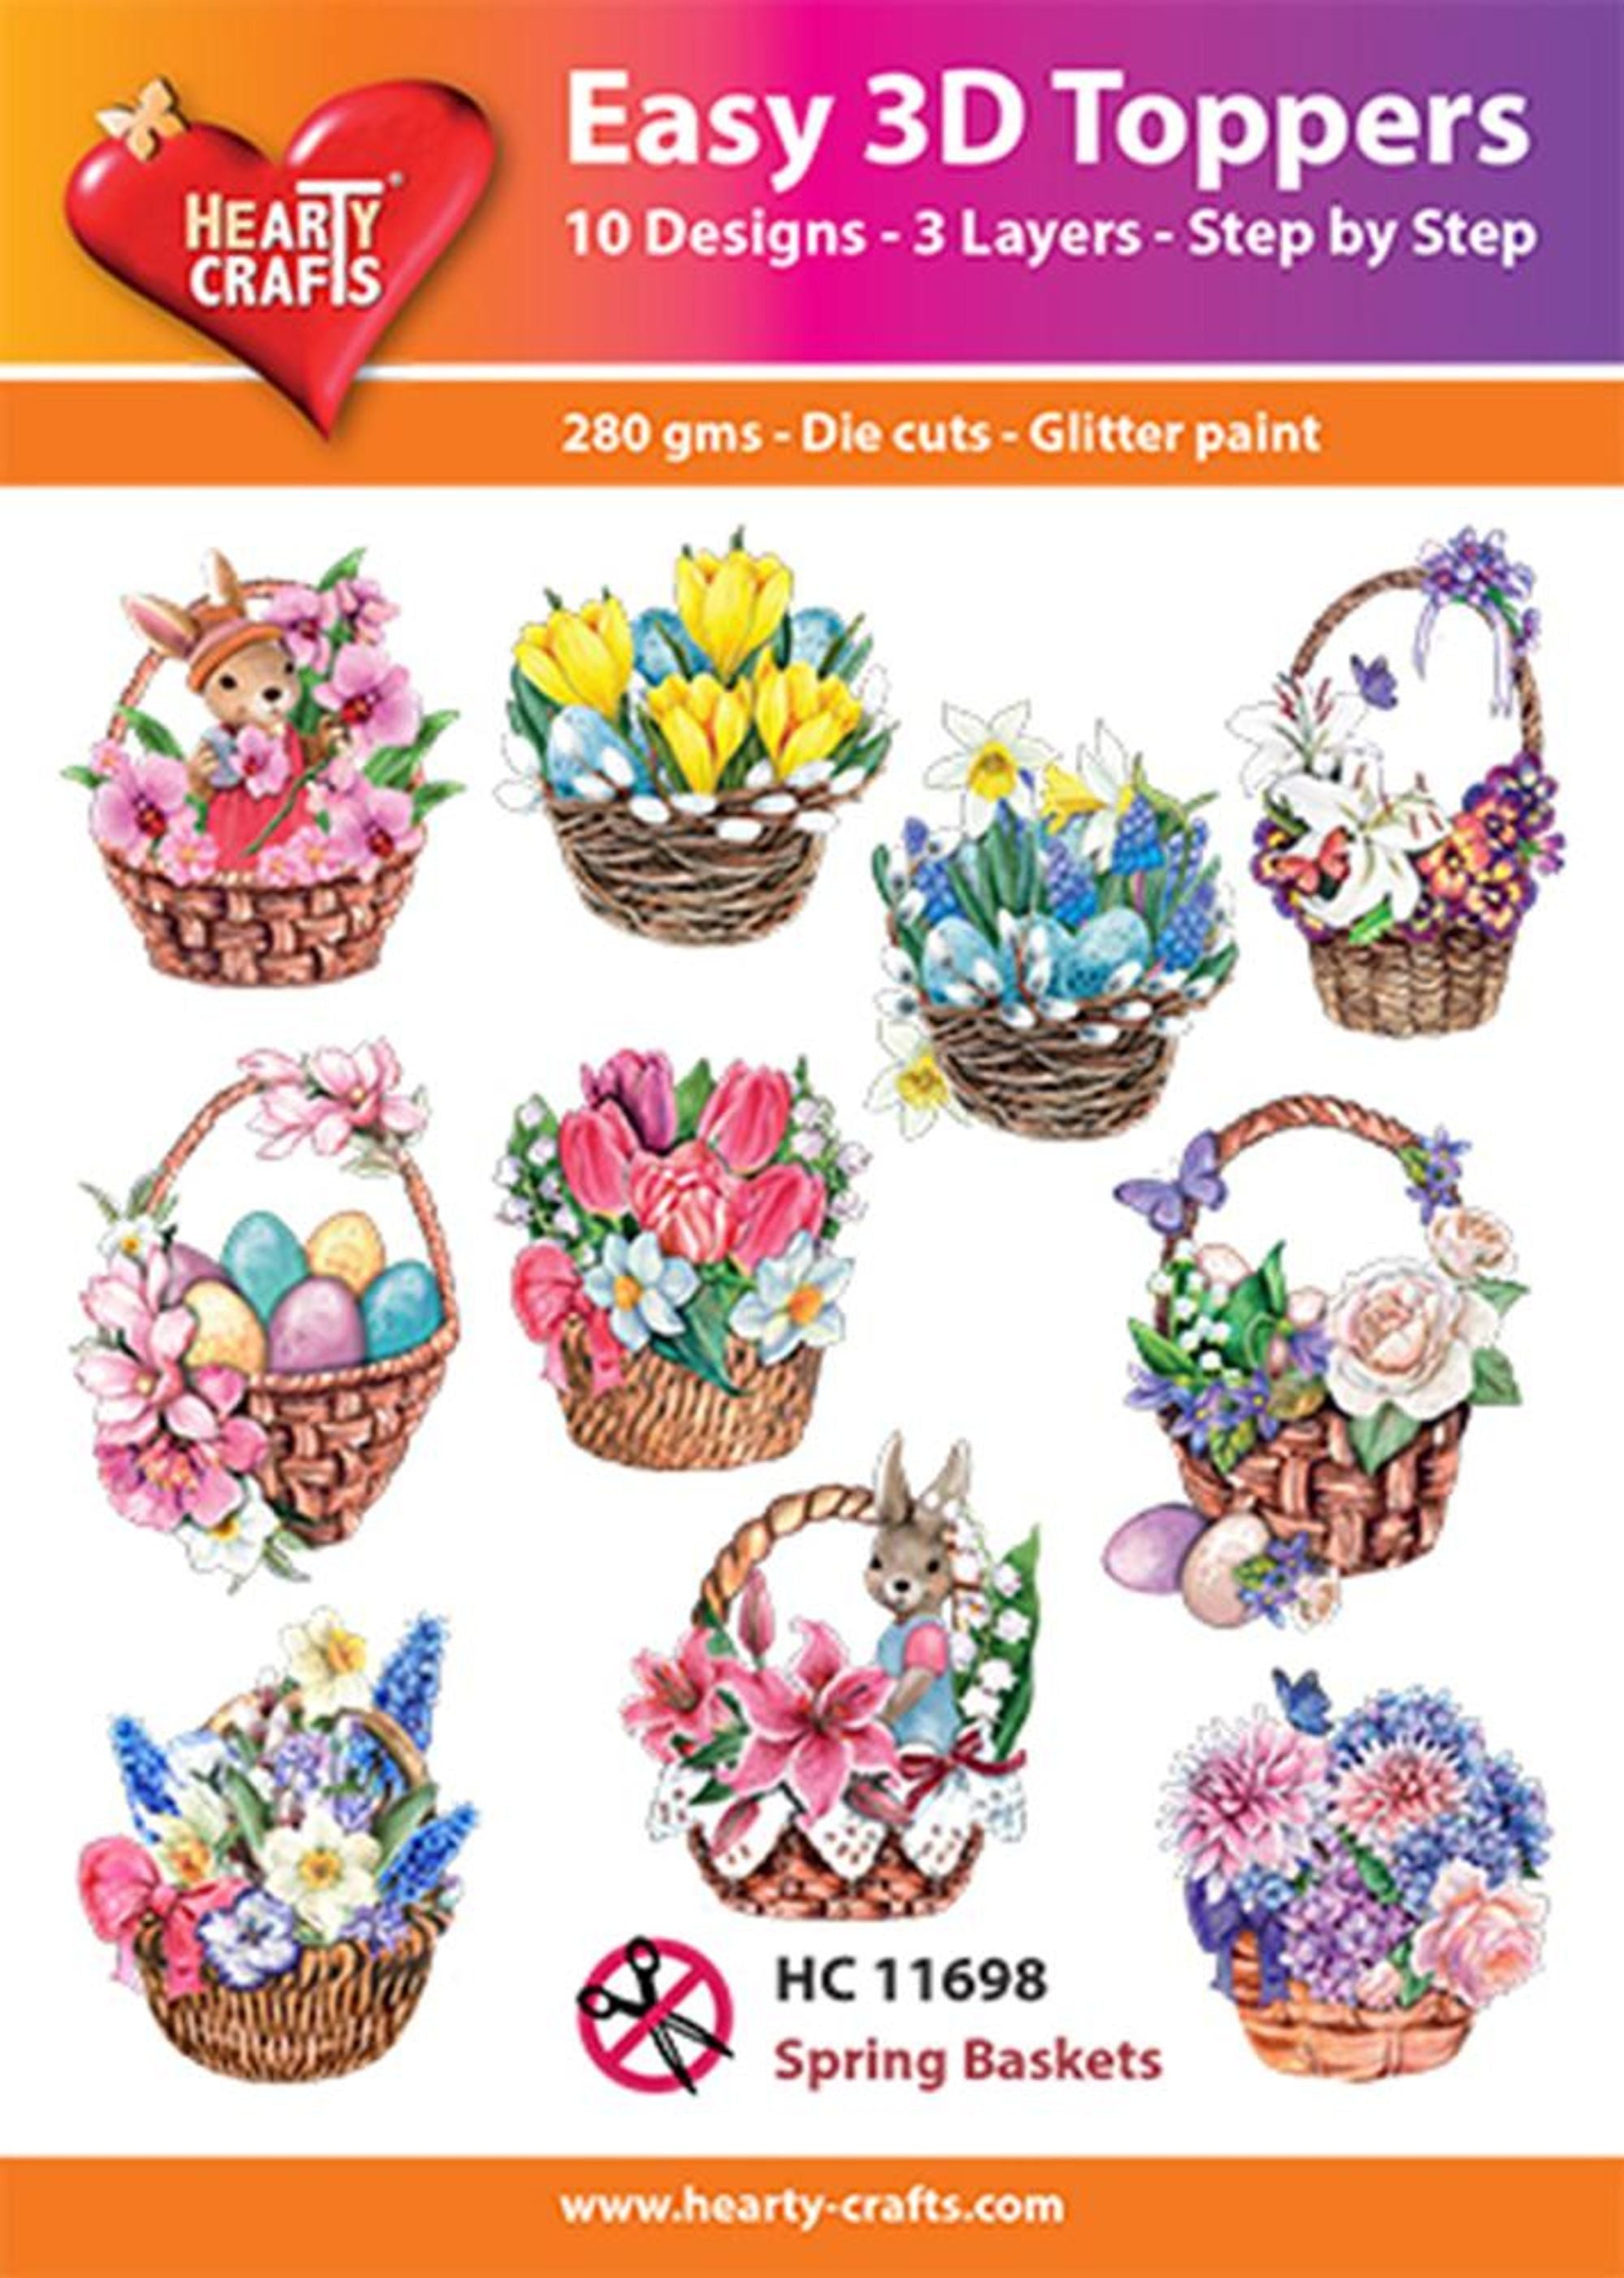 Hearty Crafts Easy 3D Toppers - Spring Baskets